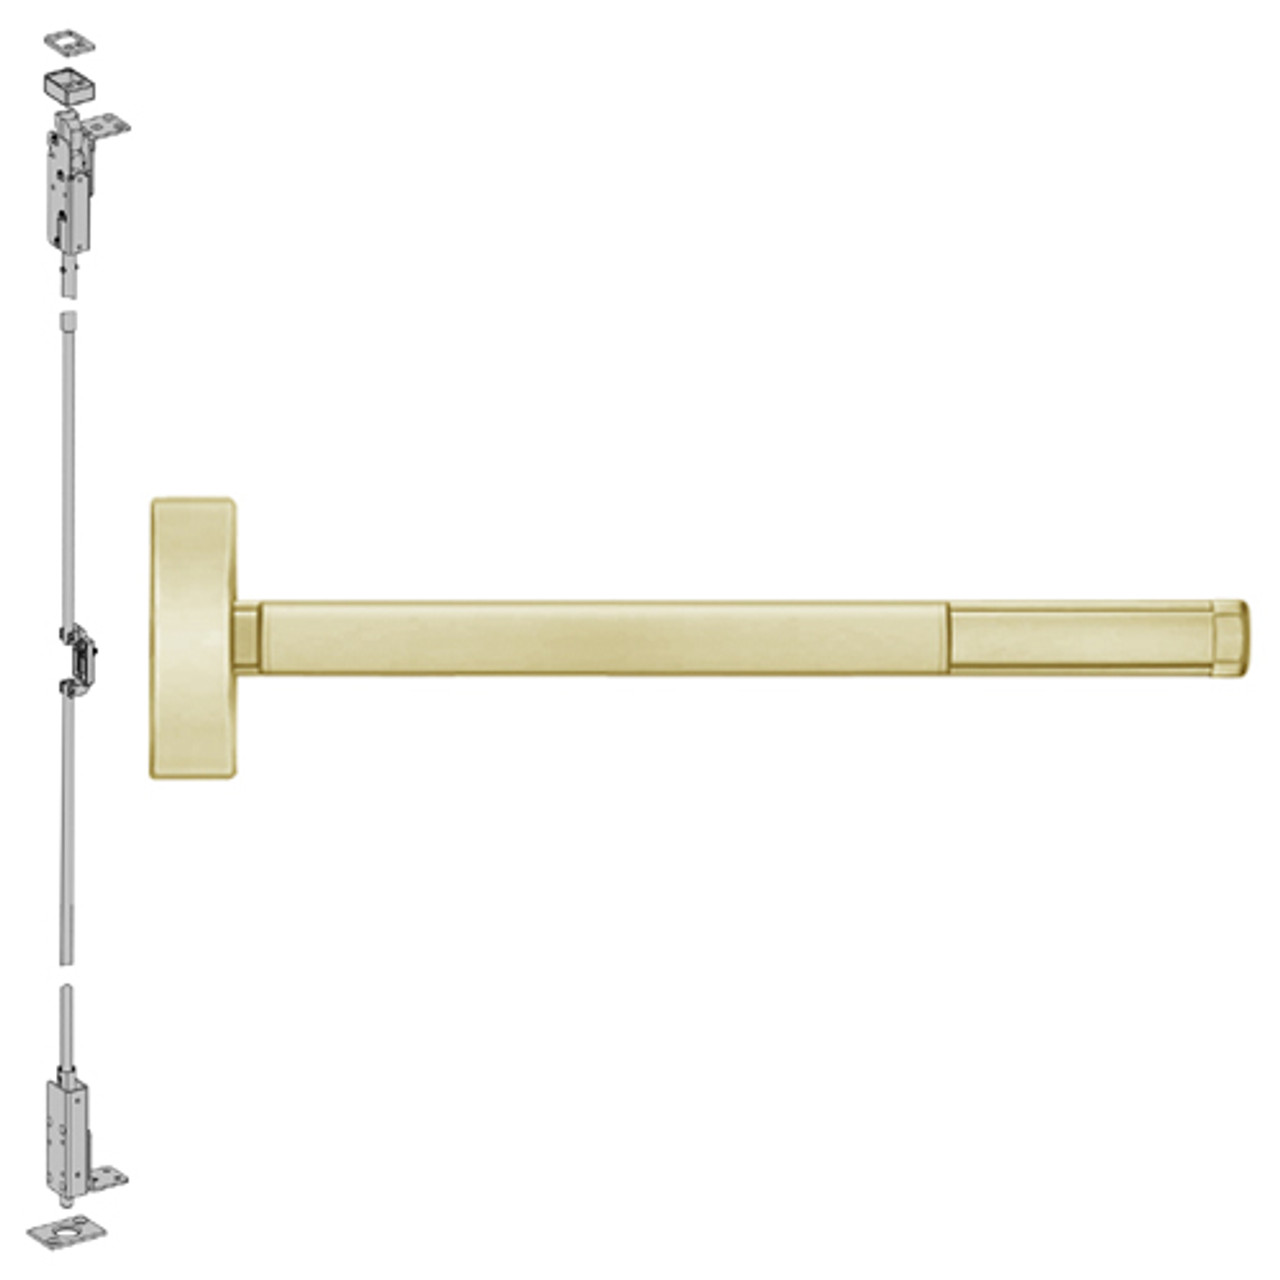 TSFL2714LBR-606-36 PHI 2700 Series Wood Door Concealed Vertical Exit Device with Touchbar Monitoring Switch Prepped for Lever-Knob Always Active in Satin Brass Finish